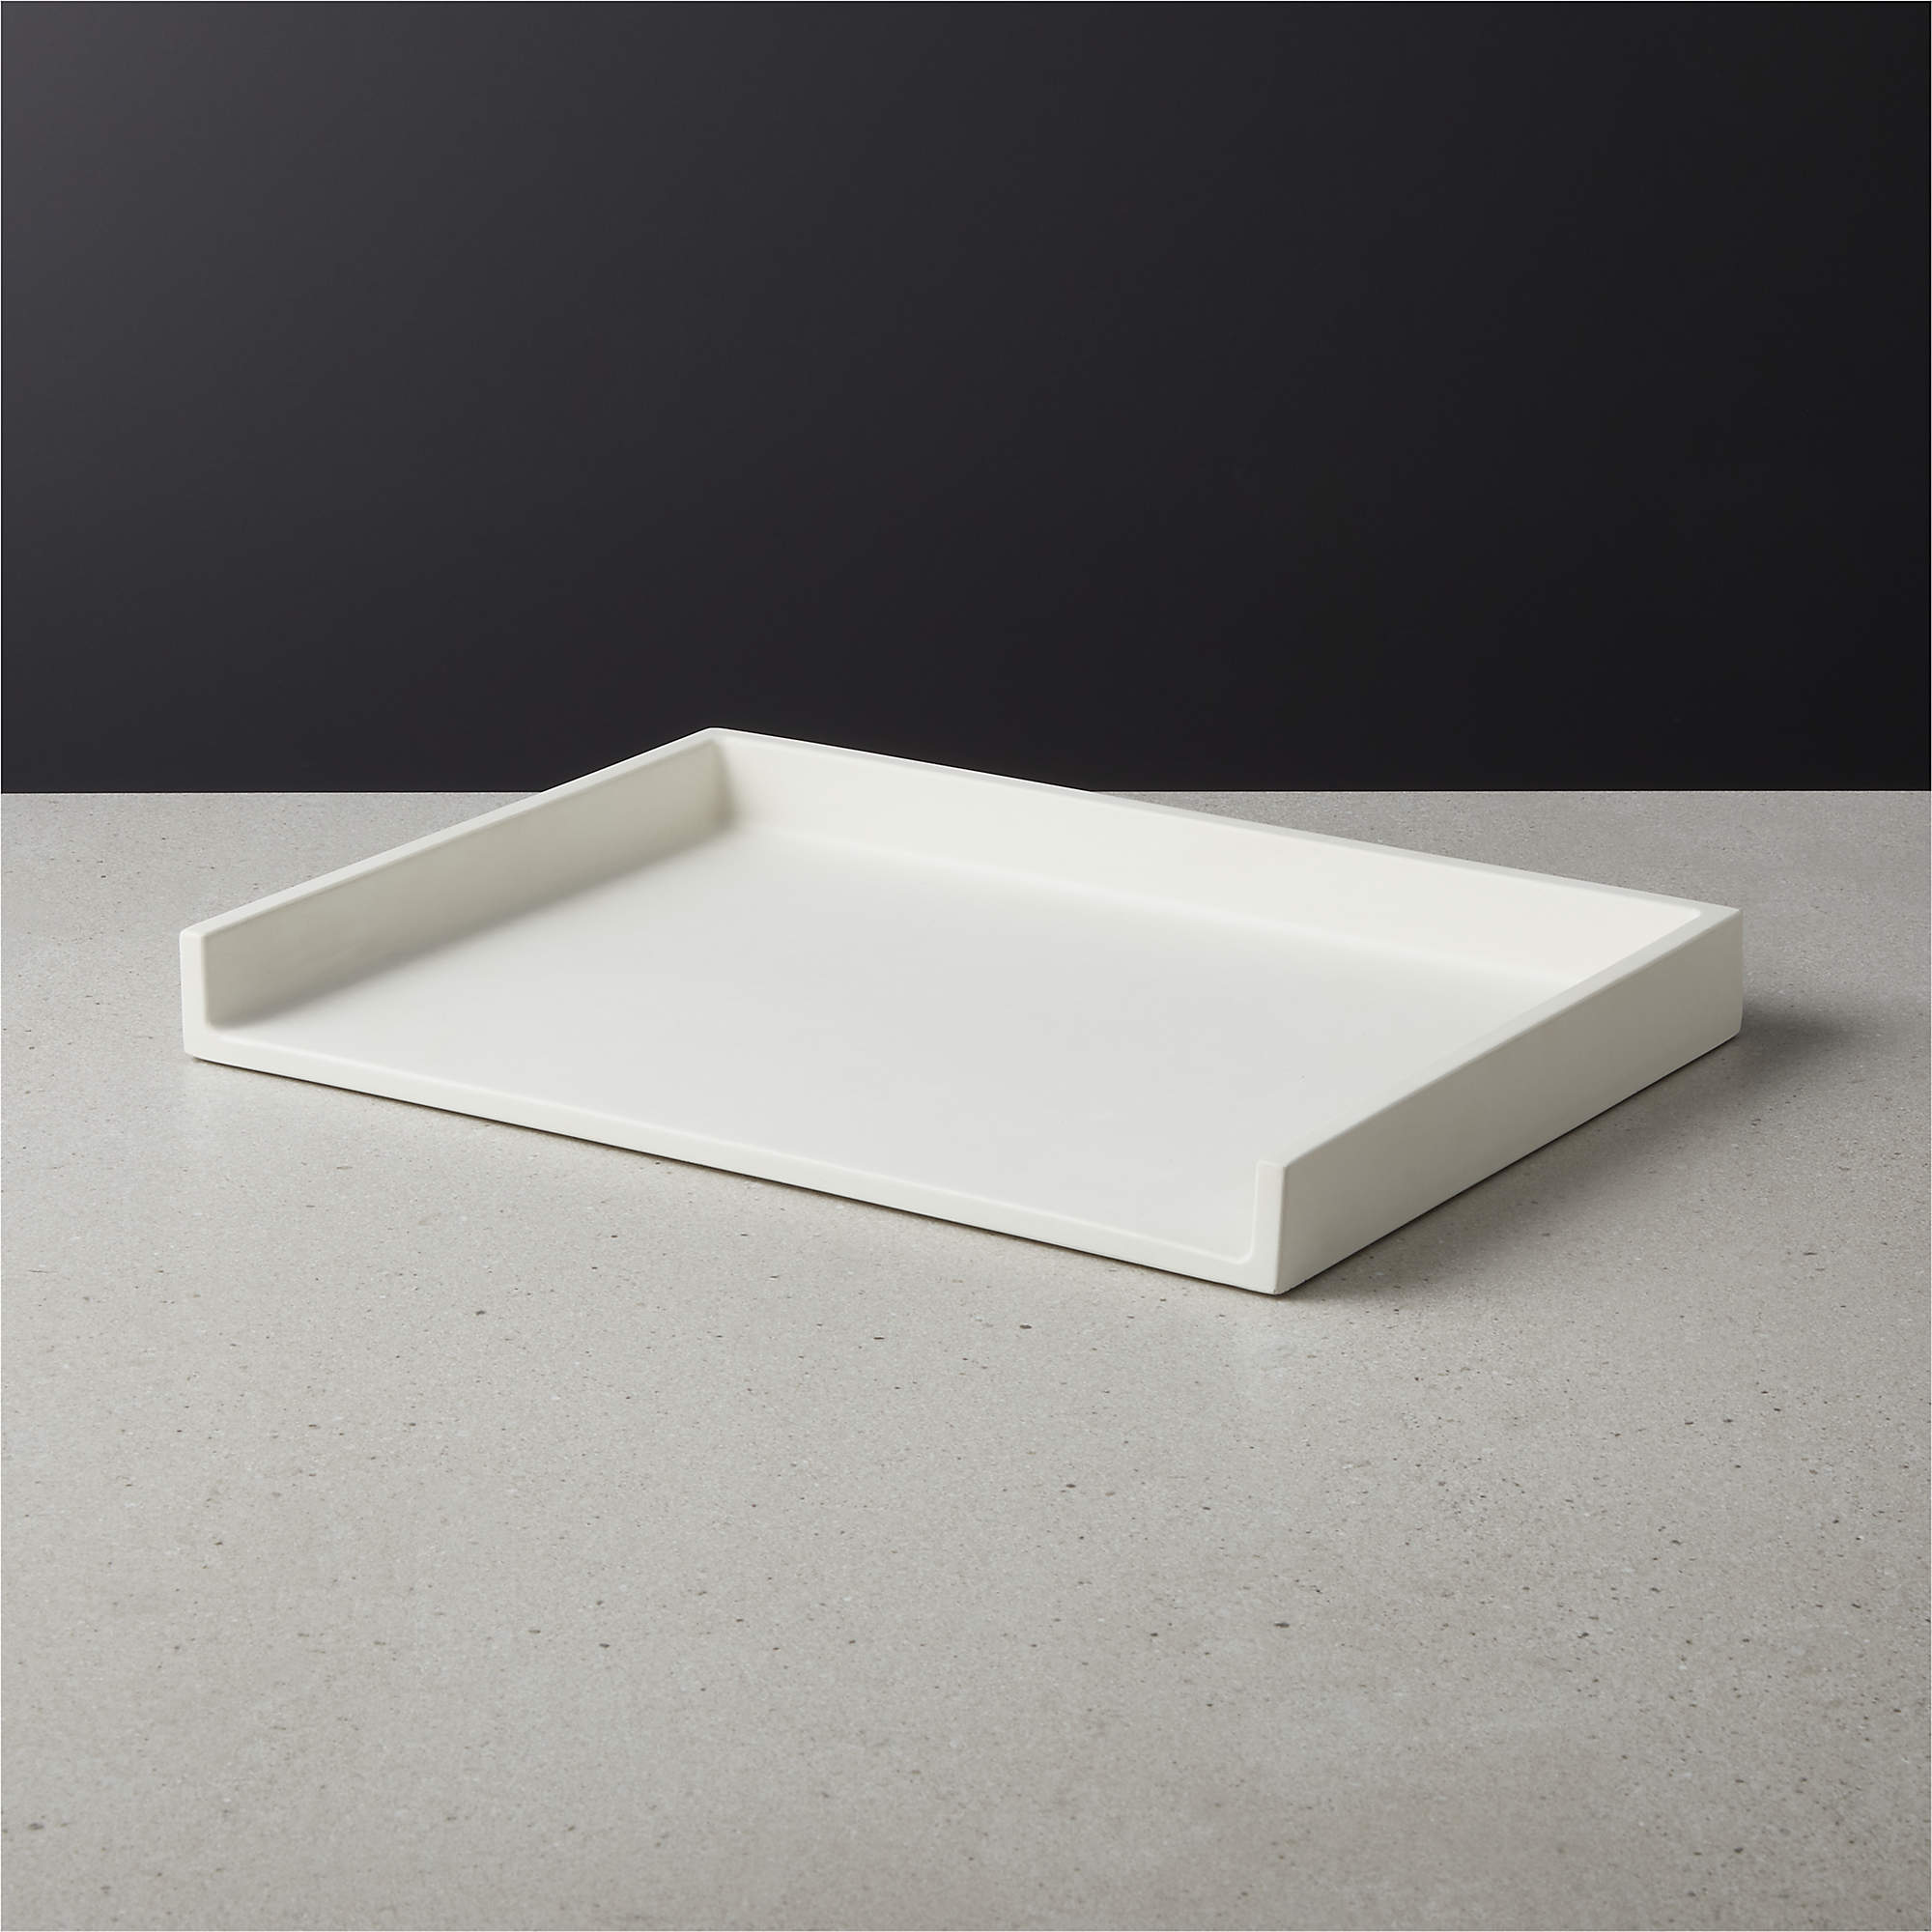 Shop CEMENT WHITE LETTER TRAY from CB2 on Openhaus